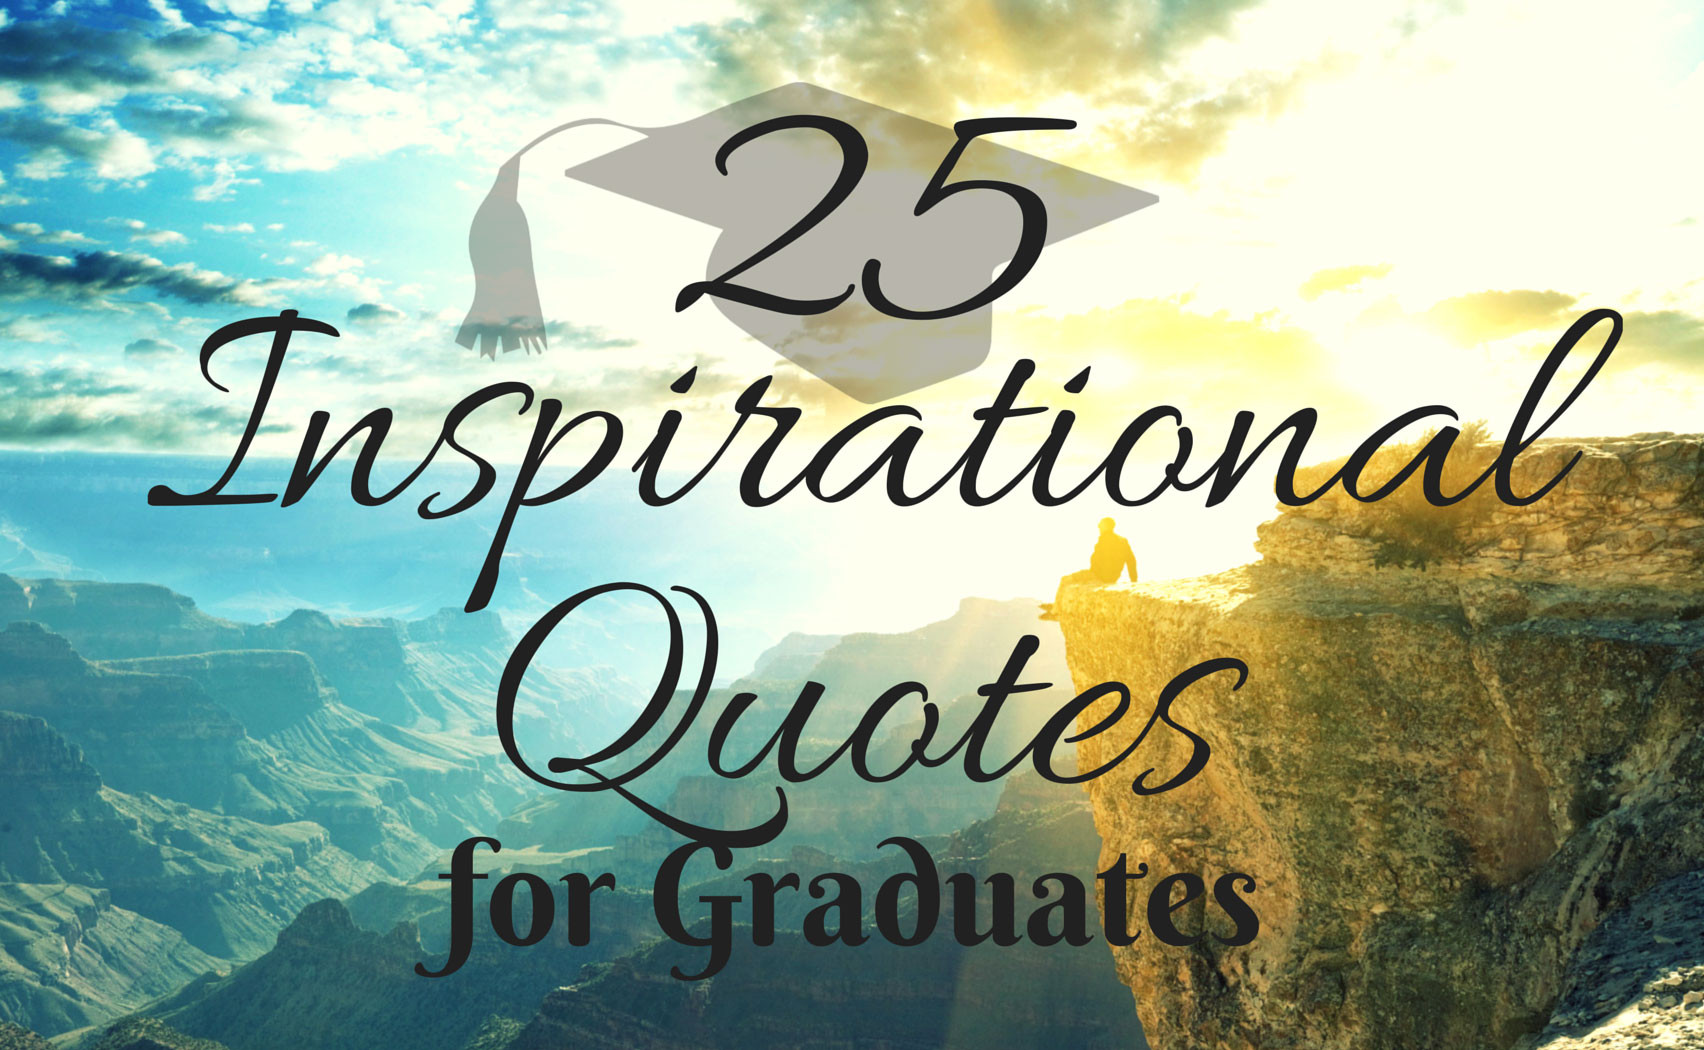 Inspirational Quotes For Highschool Graduates
 IZA Design Blog 25 Inspirational Quotes for Graduates